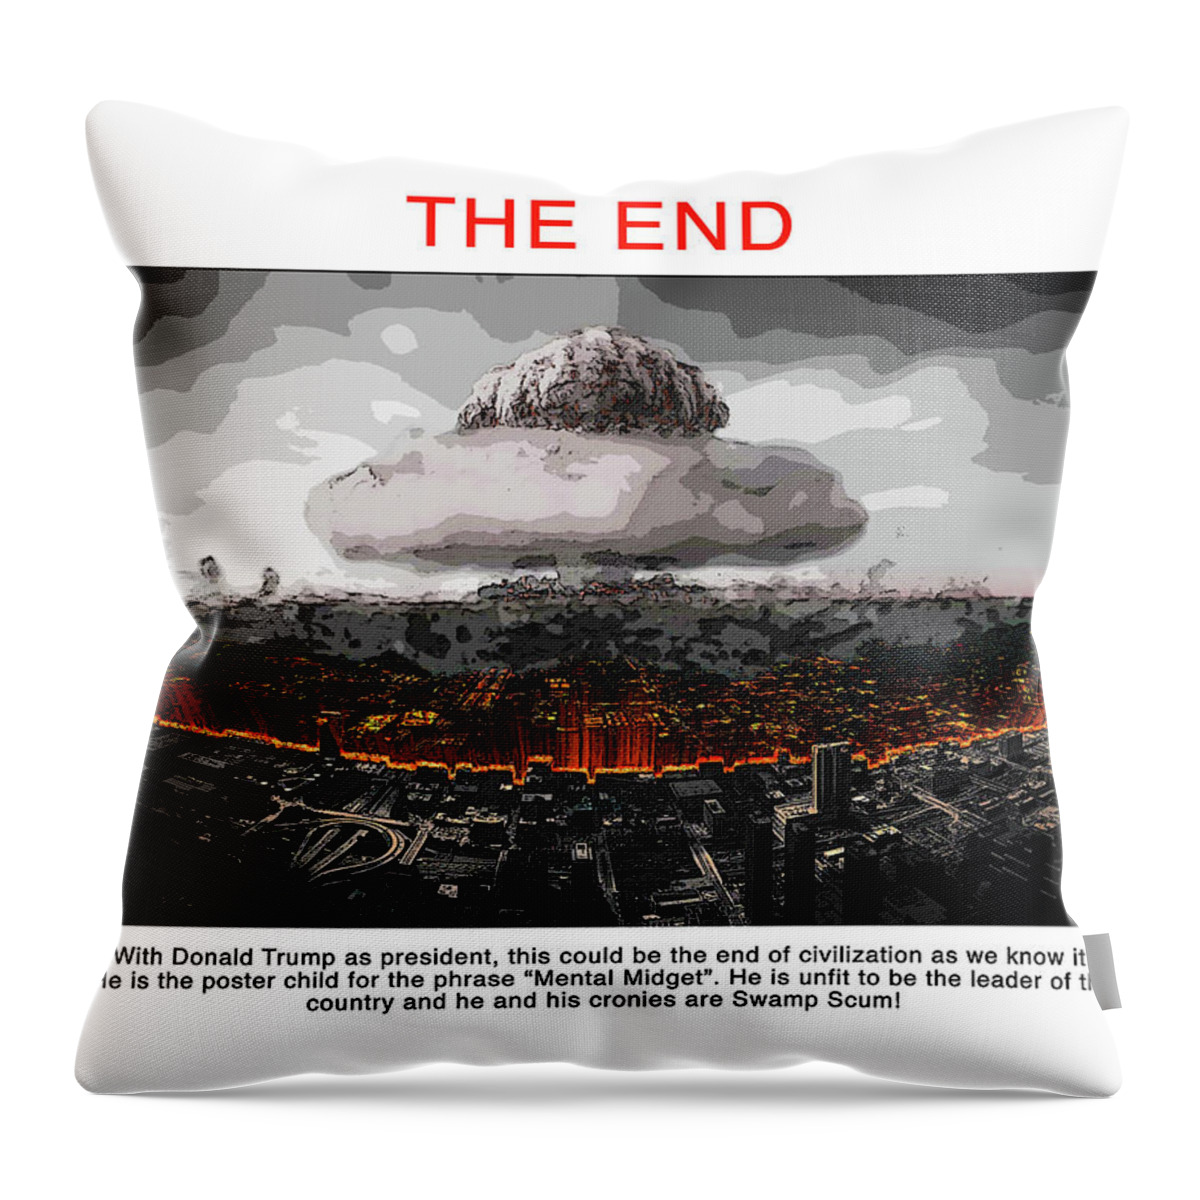 Donald Trump Throw Pillow featuring the digital art The End by Joe Palermo